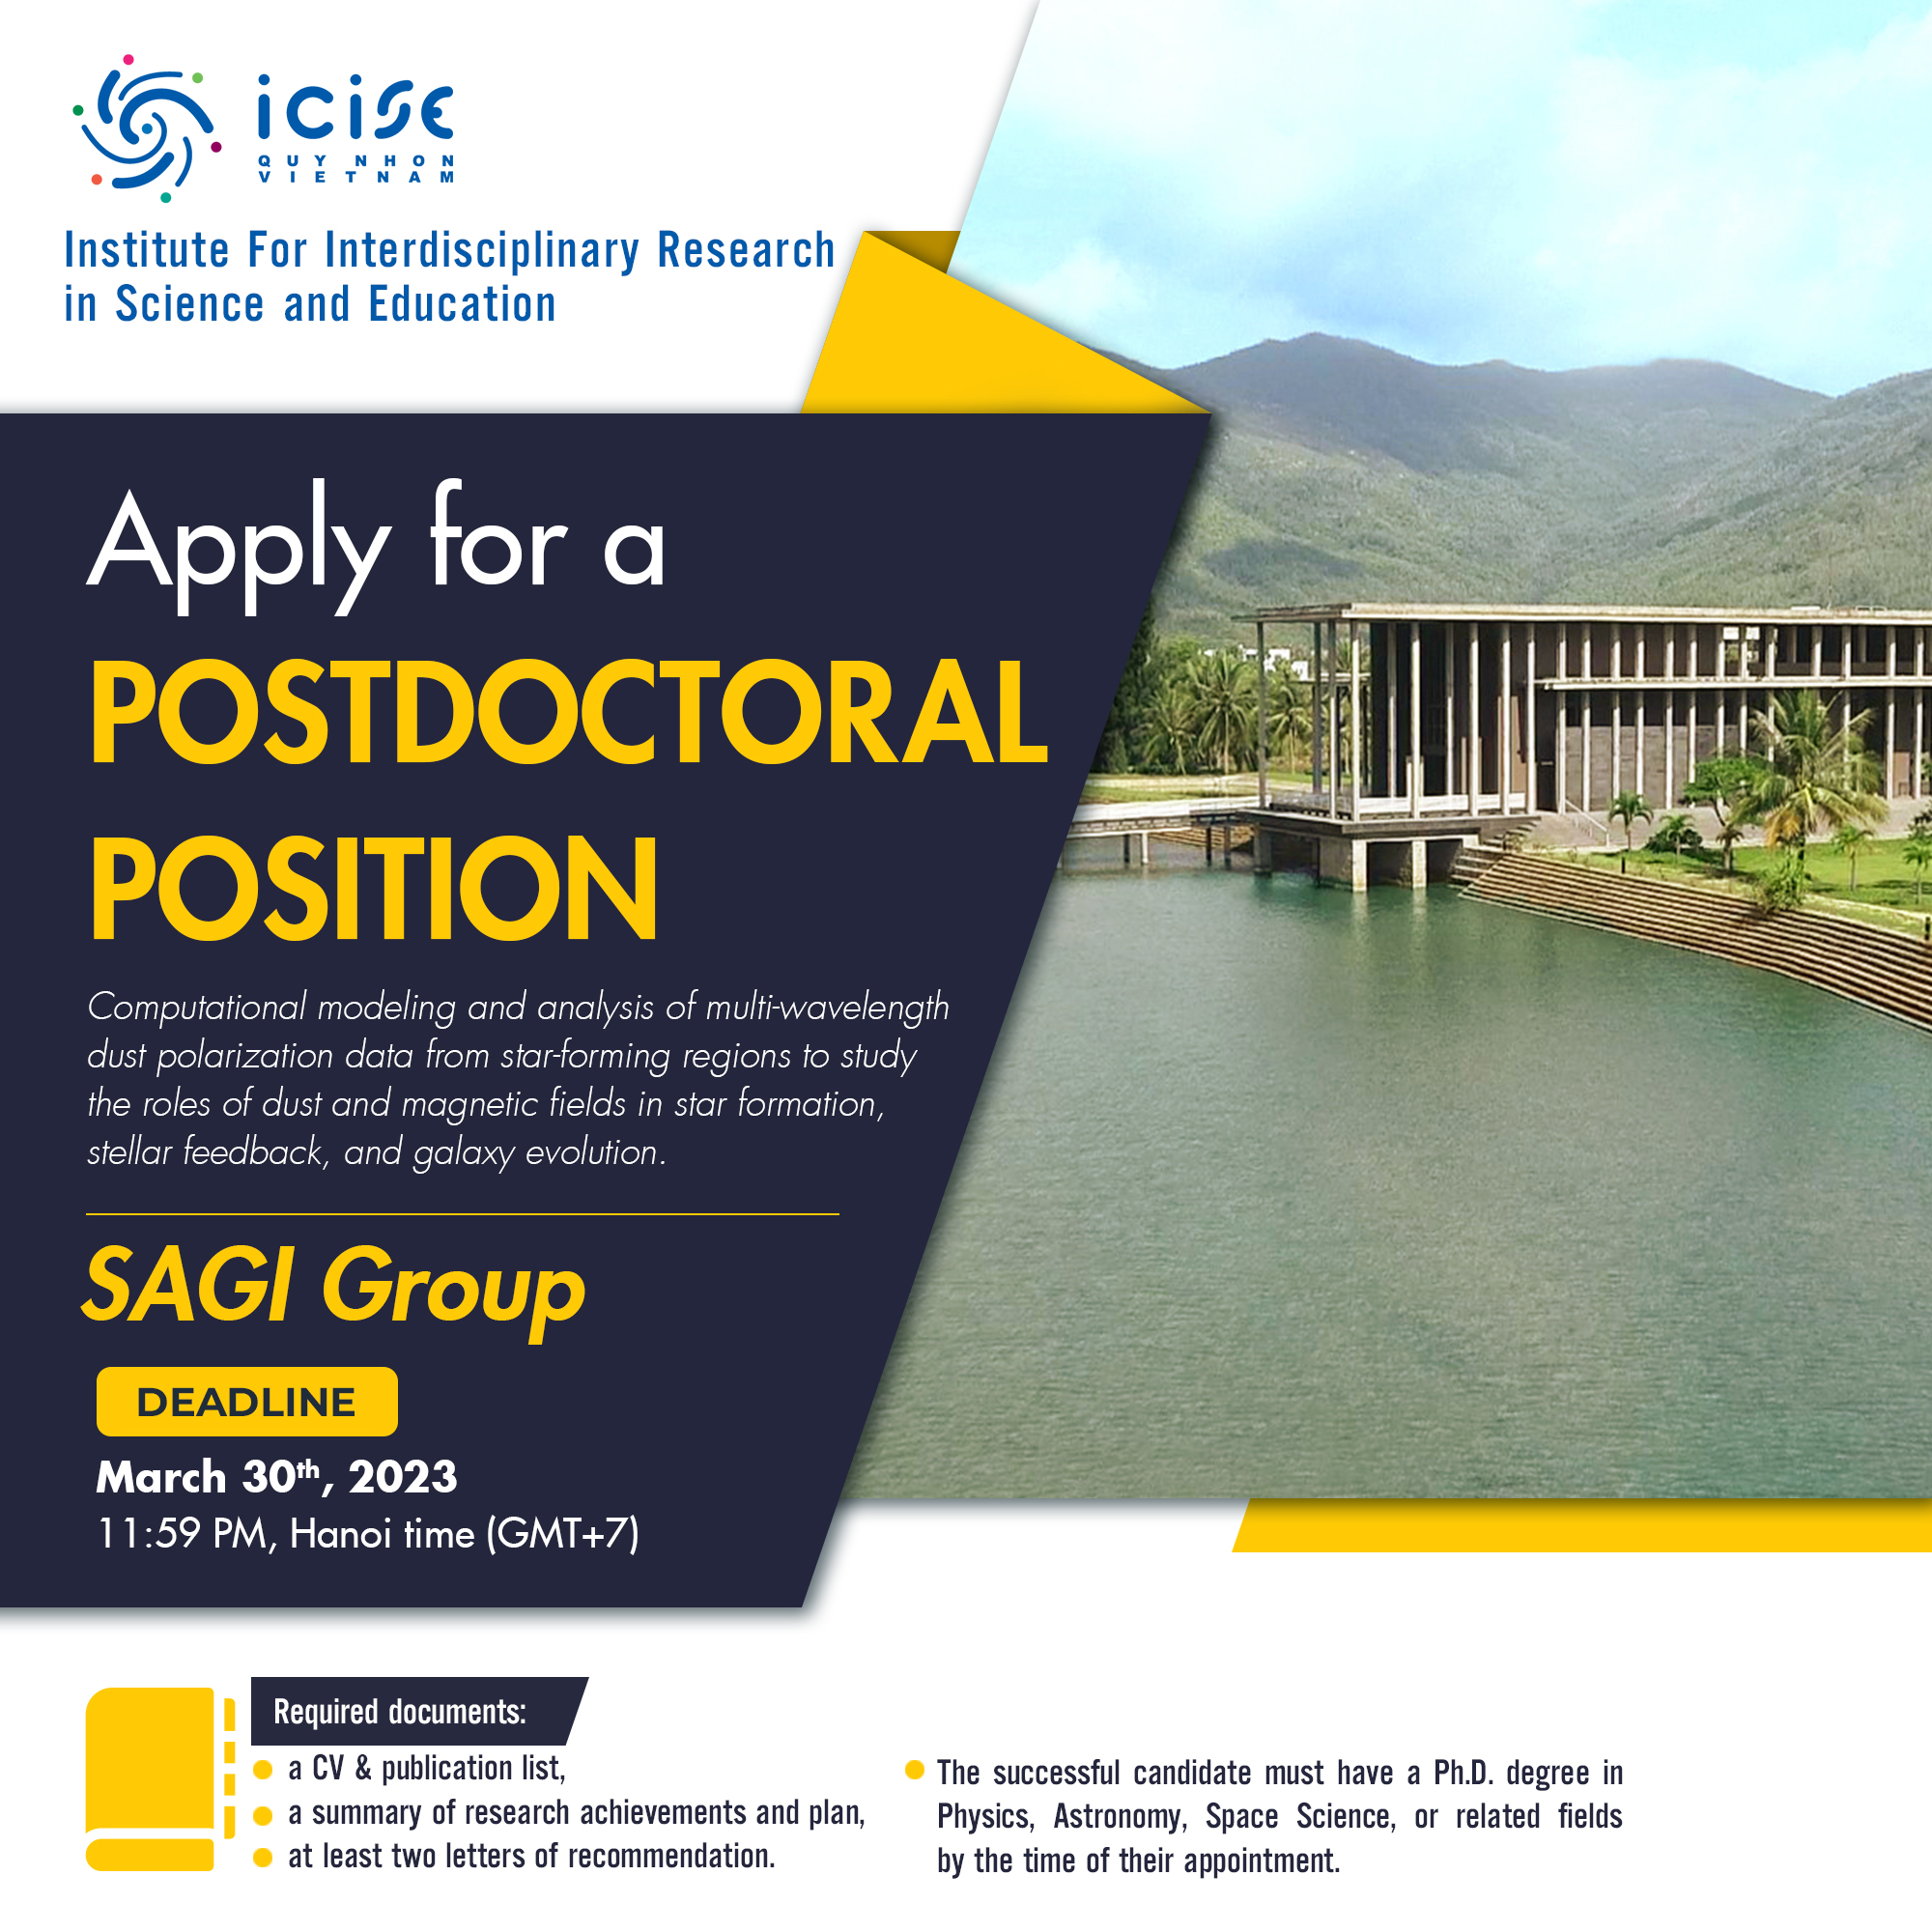 ONE POSTDOCTORAL POSITION IN SIMONS ASTROPHYSICS GROUP AT ICISE (QUY NHON, VIET NAM)